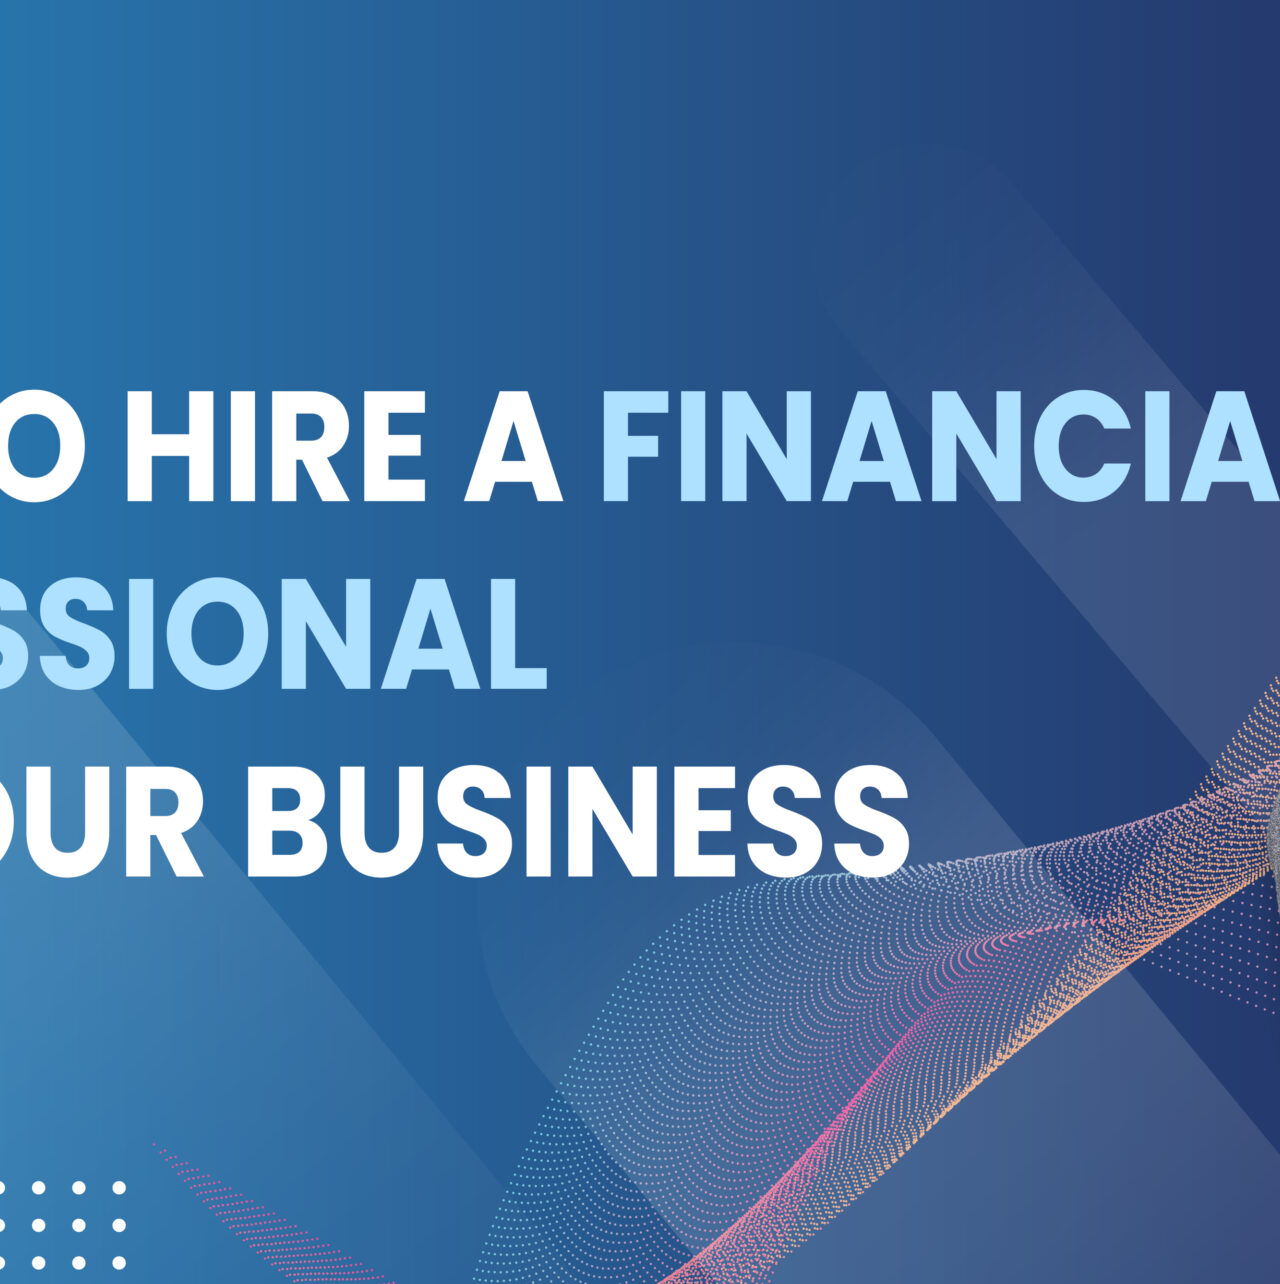 How to hire a financial professional for your business